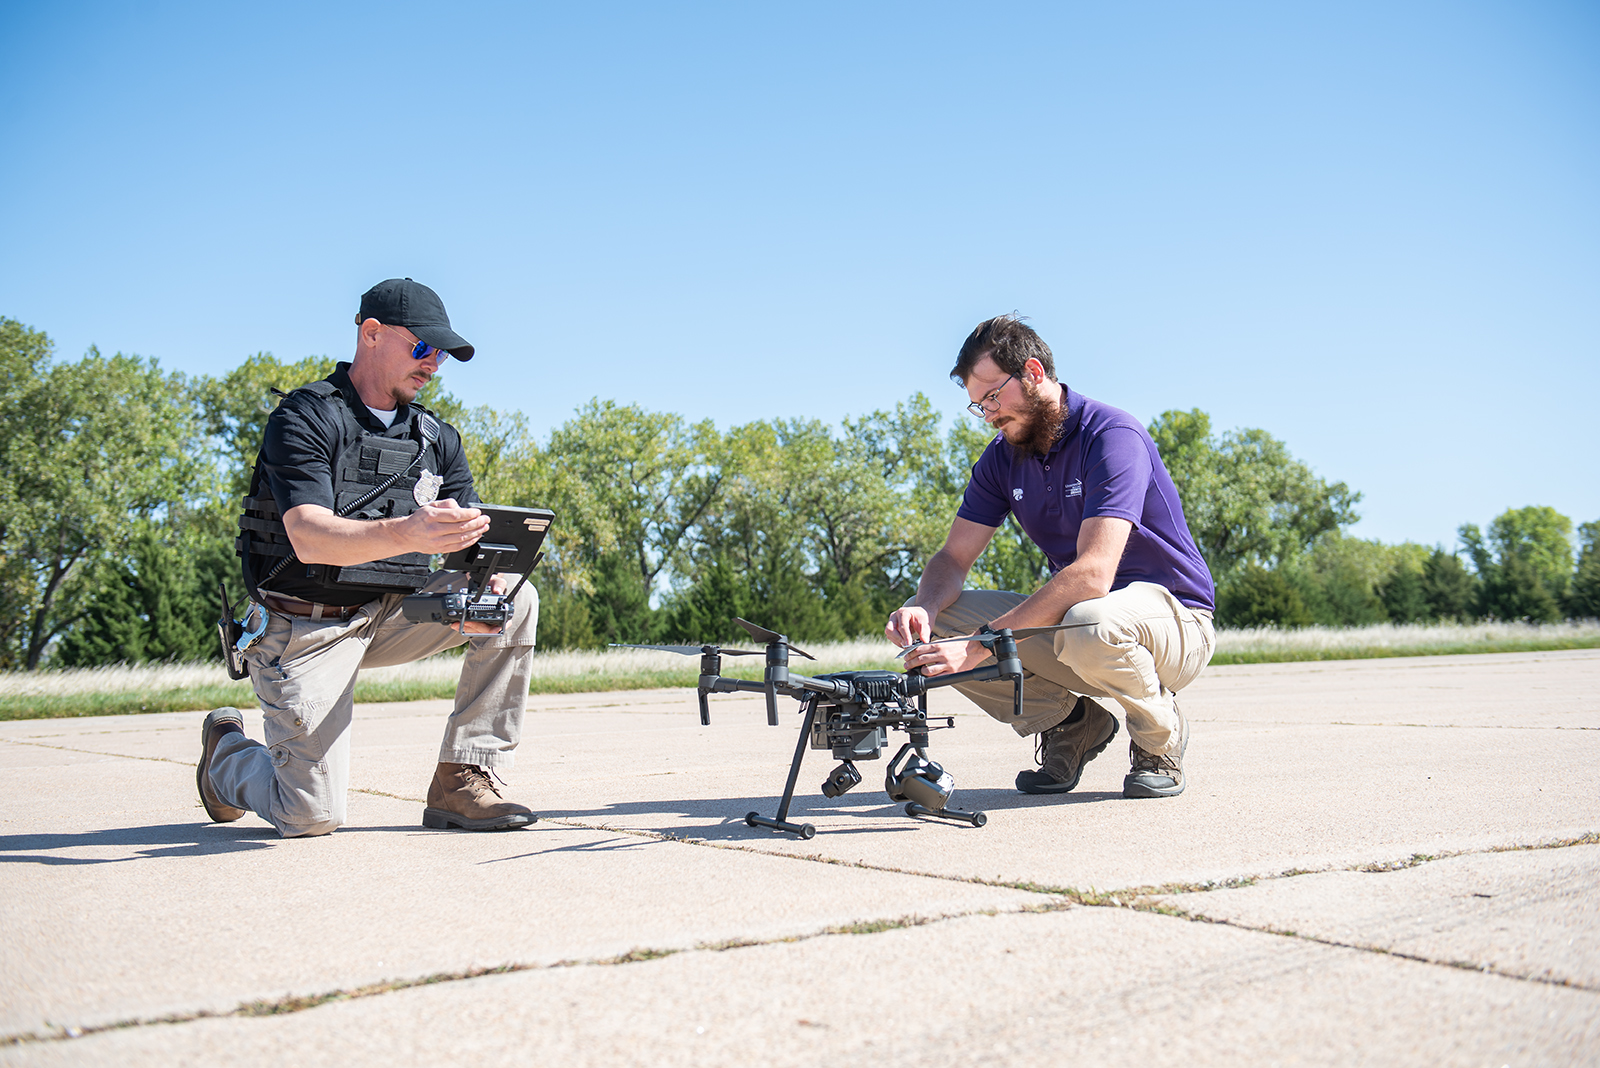 Professionals can add to their skills by adding education in drones. K-State Salina's UAS experts offer extensive course offerings to train and prepare learners to safely utilize drone technology. Many learners become FAA-approved by completion of the course. 